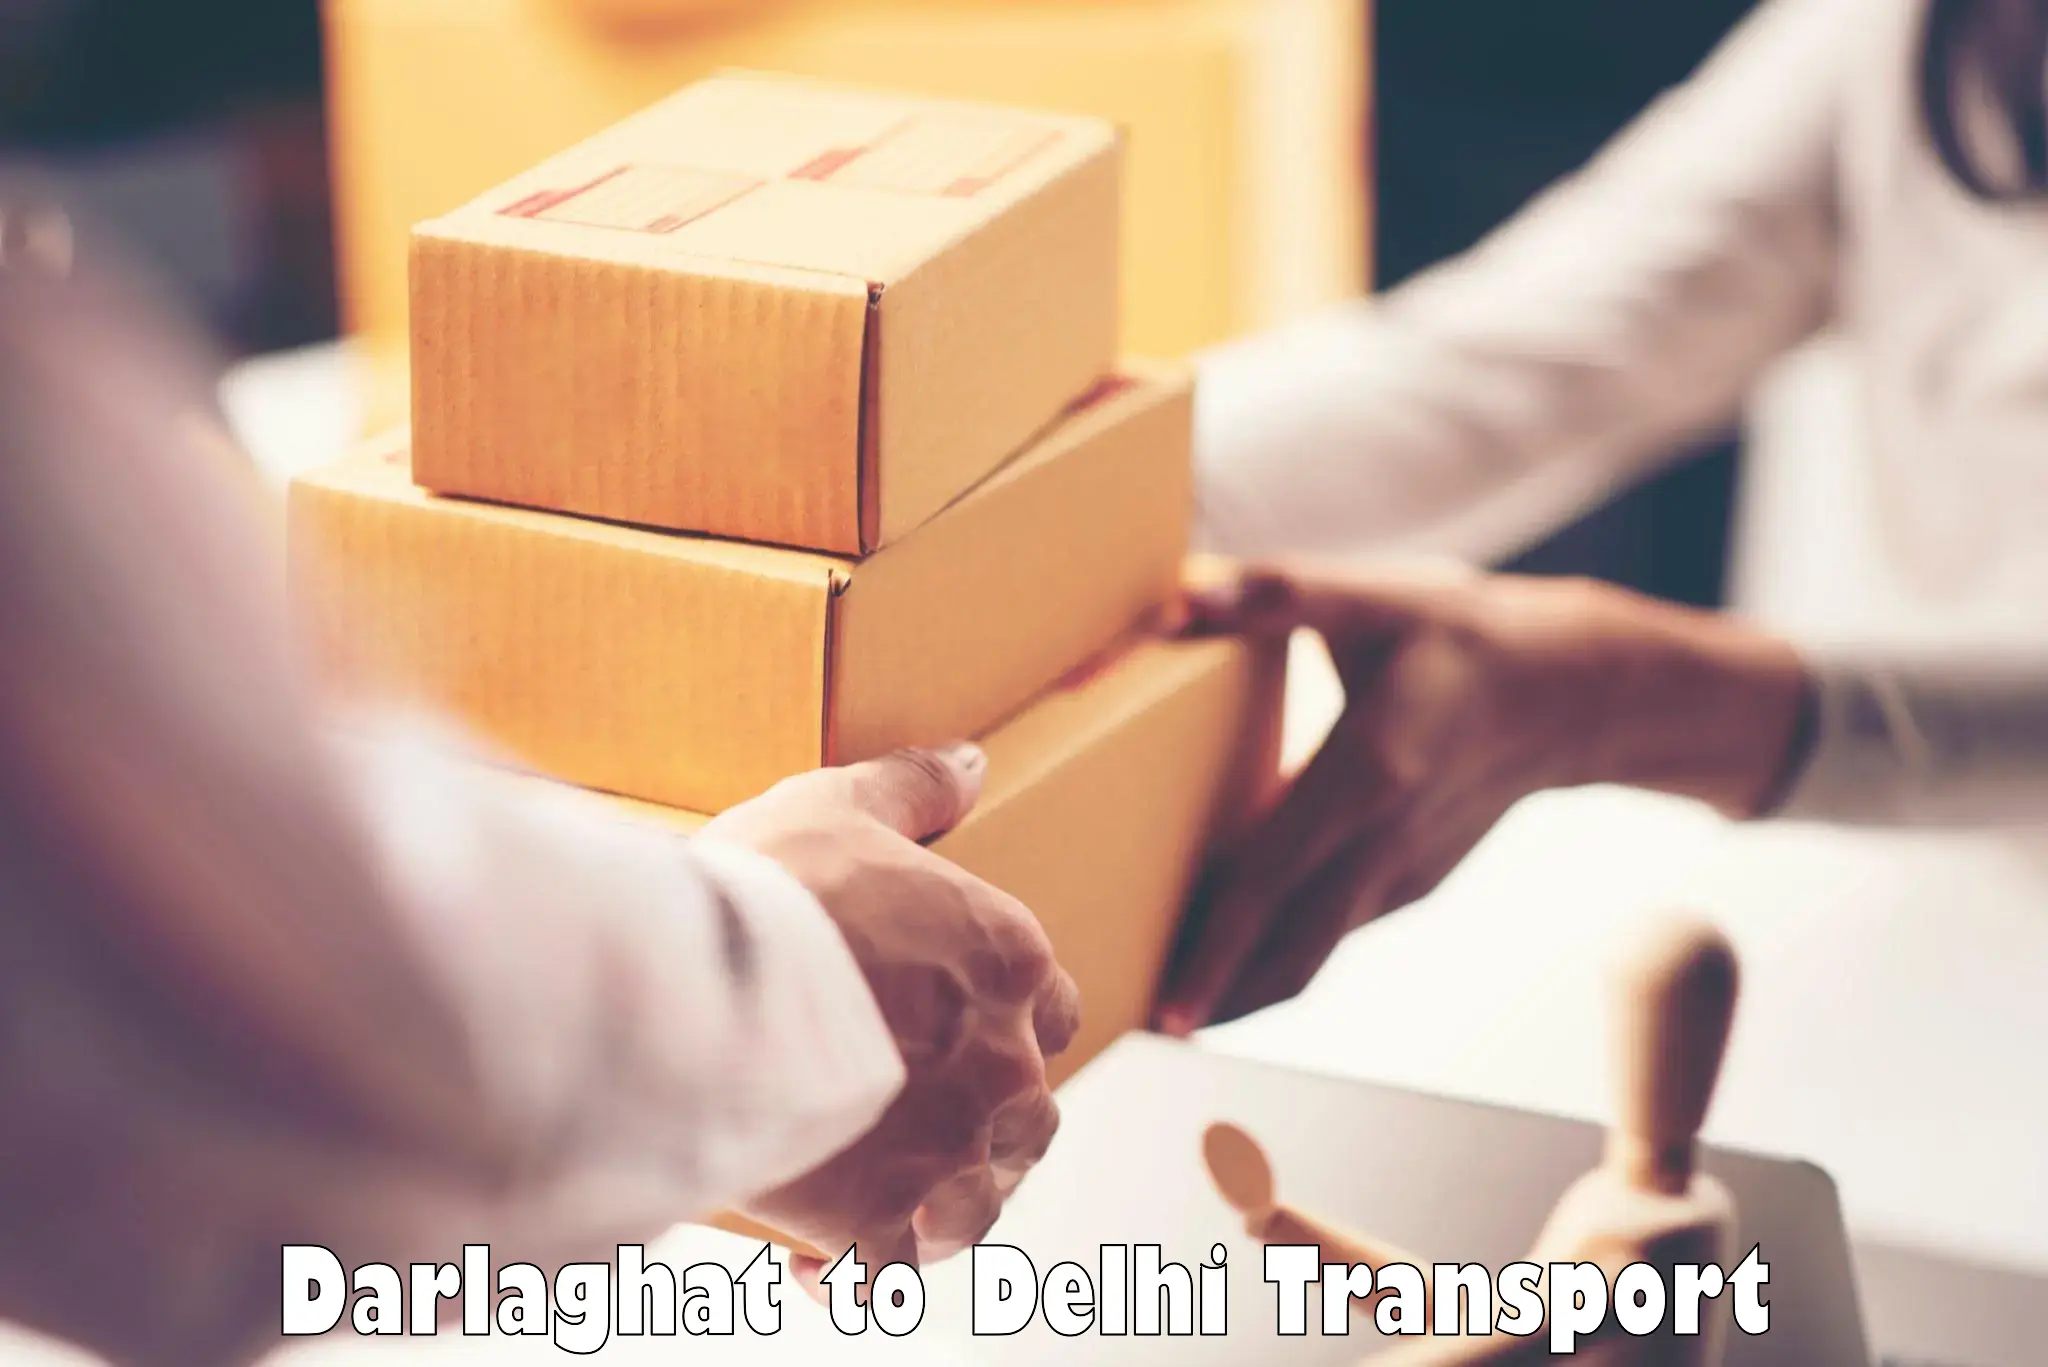 Delivery service Darlaghat to Delhi